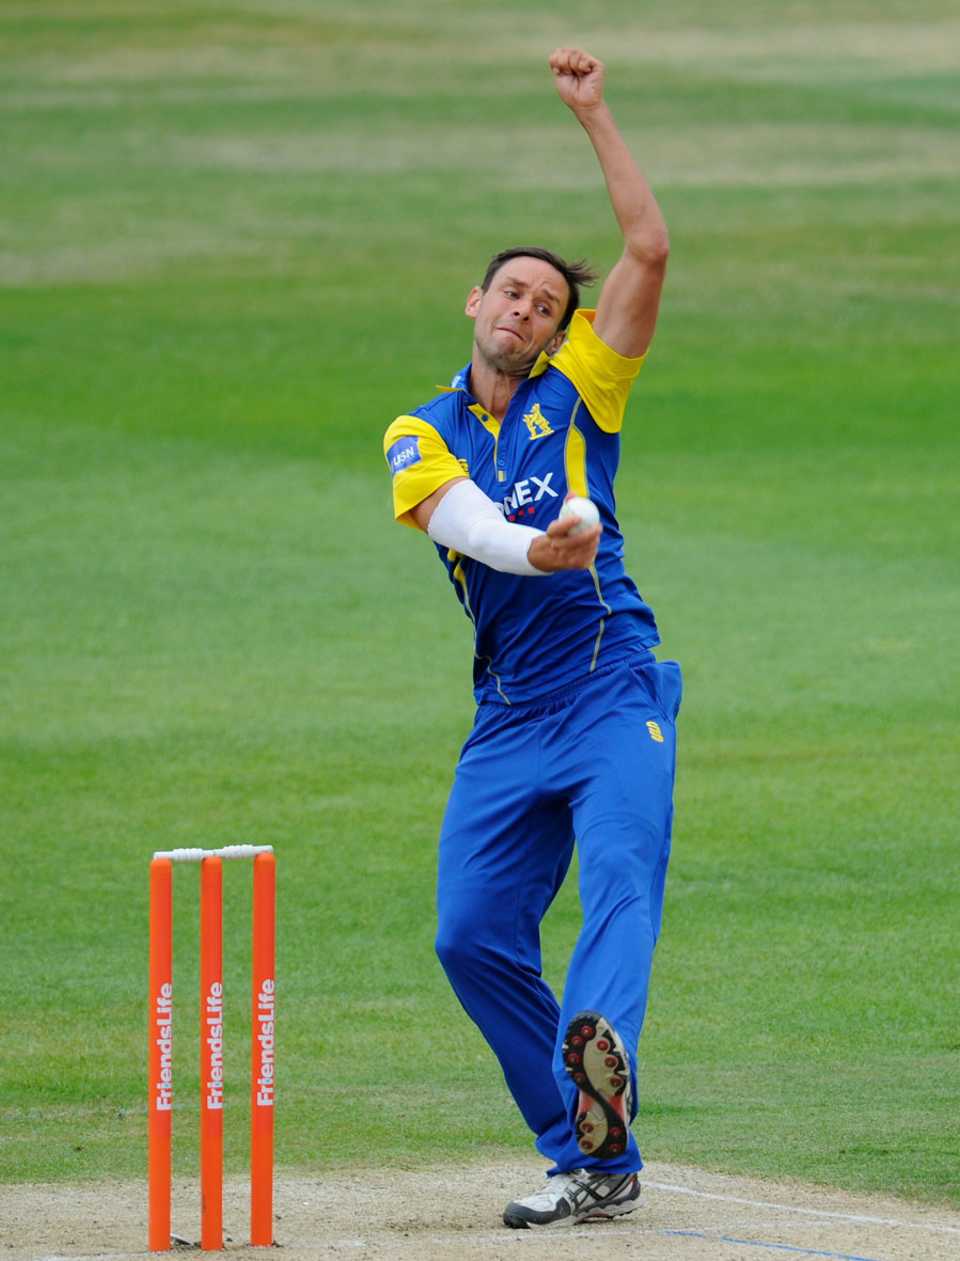 Steffan Piolet took three wickets and a run out